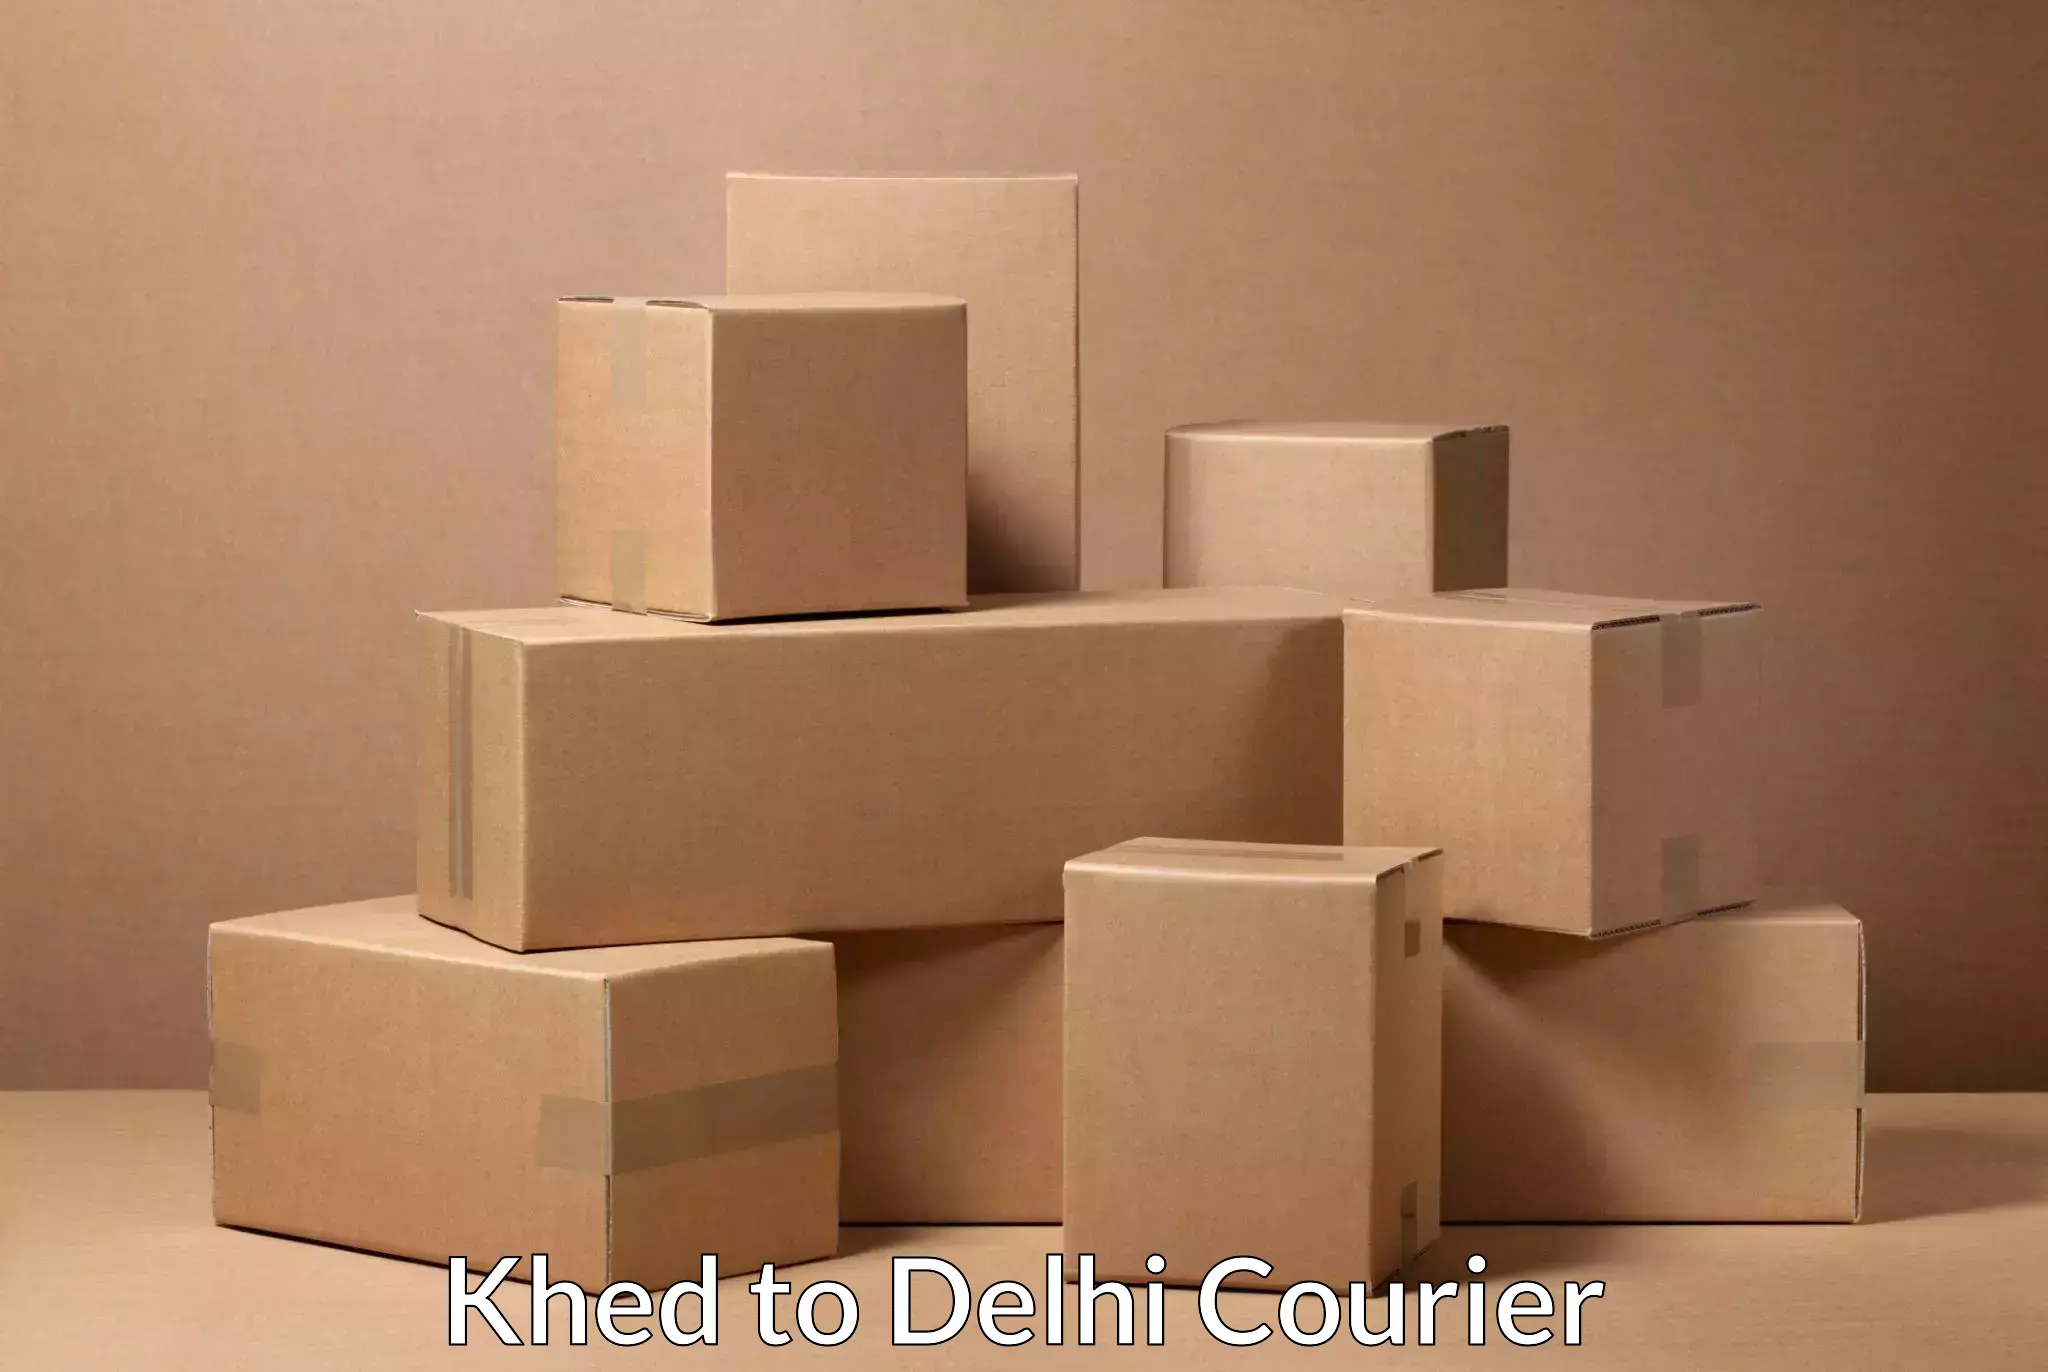 Supply chain efficiency Khed to Delhi